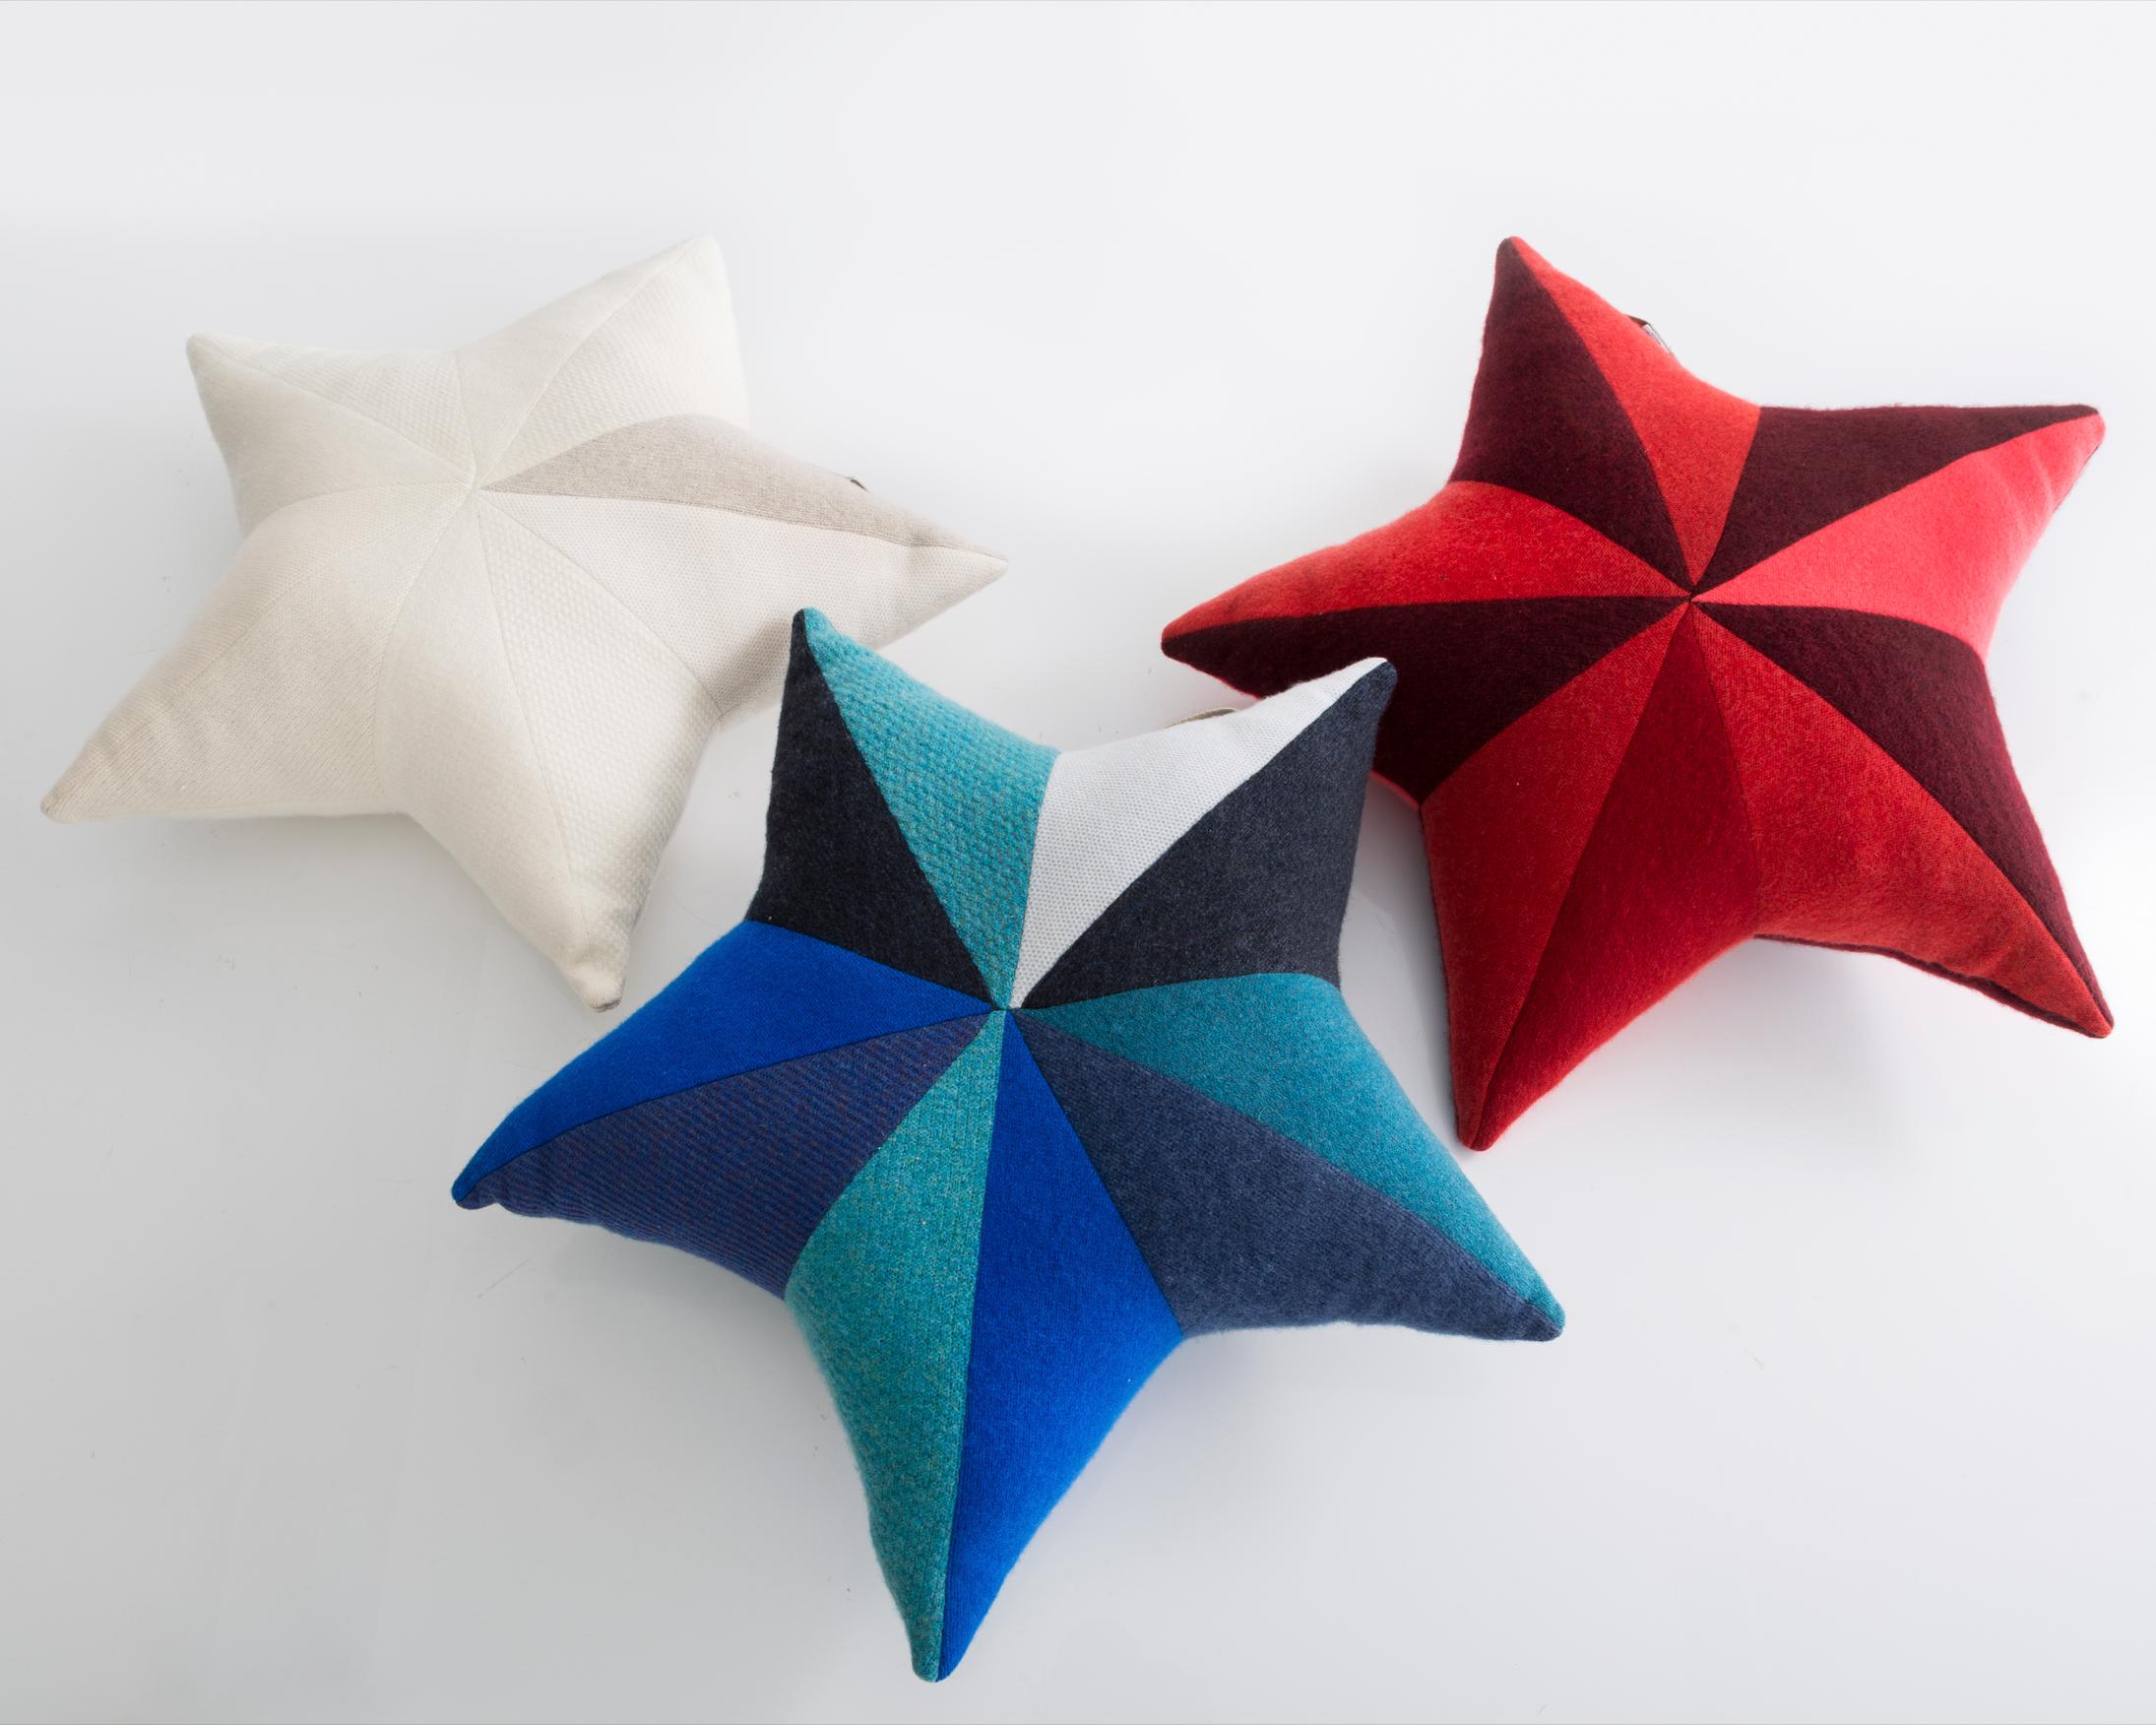 American Star-Shaped Patchwordk Pillow in Blue Cashmere by Greg Chait, 2017